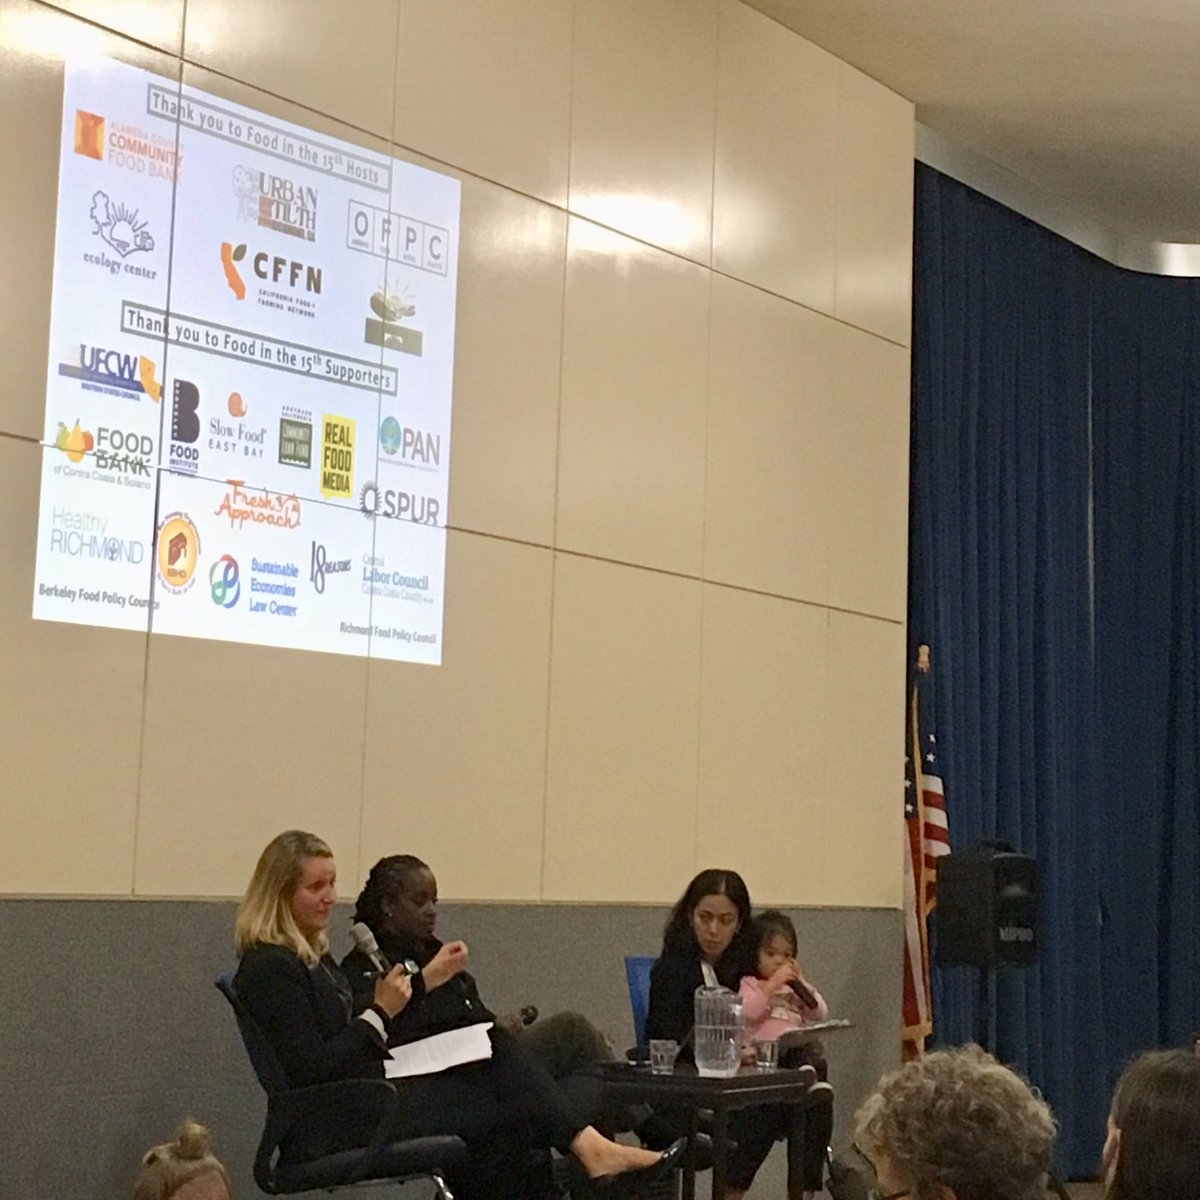 #AD15 women who care about their community. #FarmerEquityAct, #CalFresh, #CommunityLandTrusts,
#sustainableag all addressed at tonight’s #FoodInThe15th. And check out the working mom moderator!!